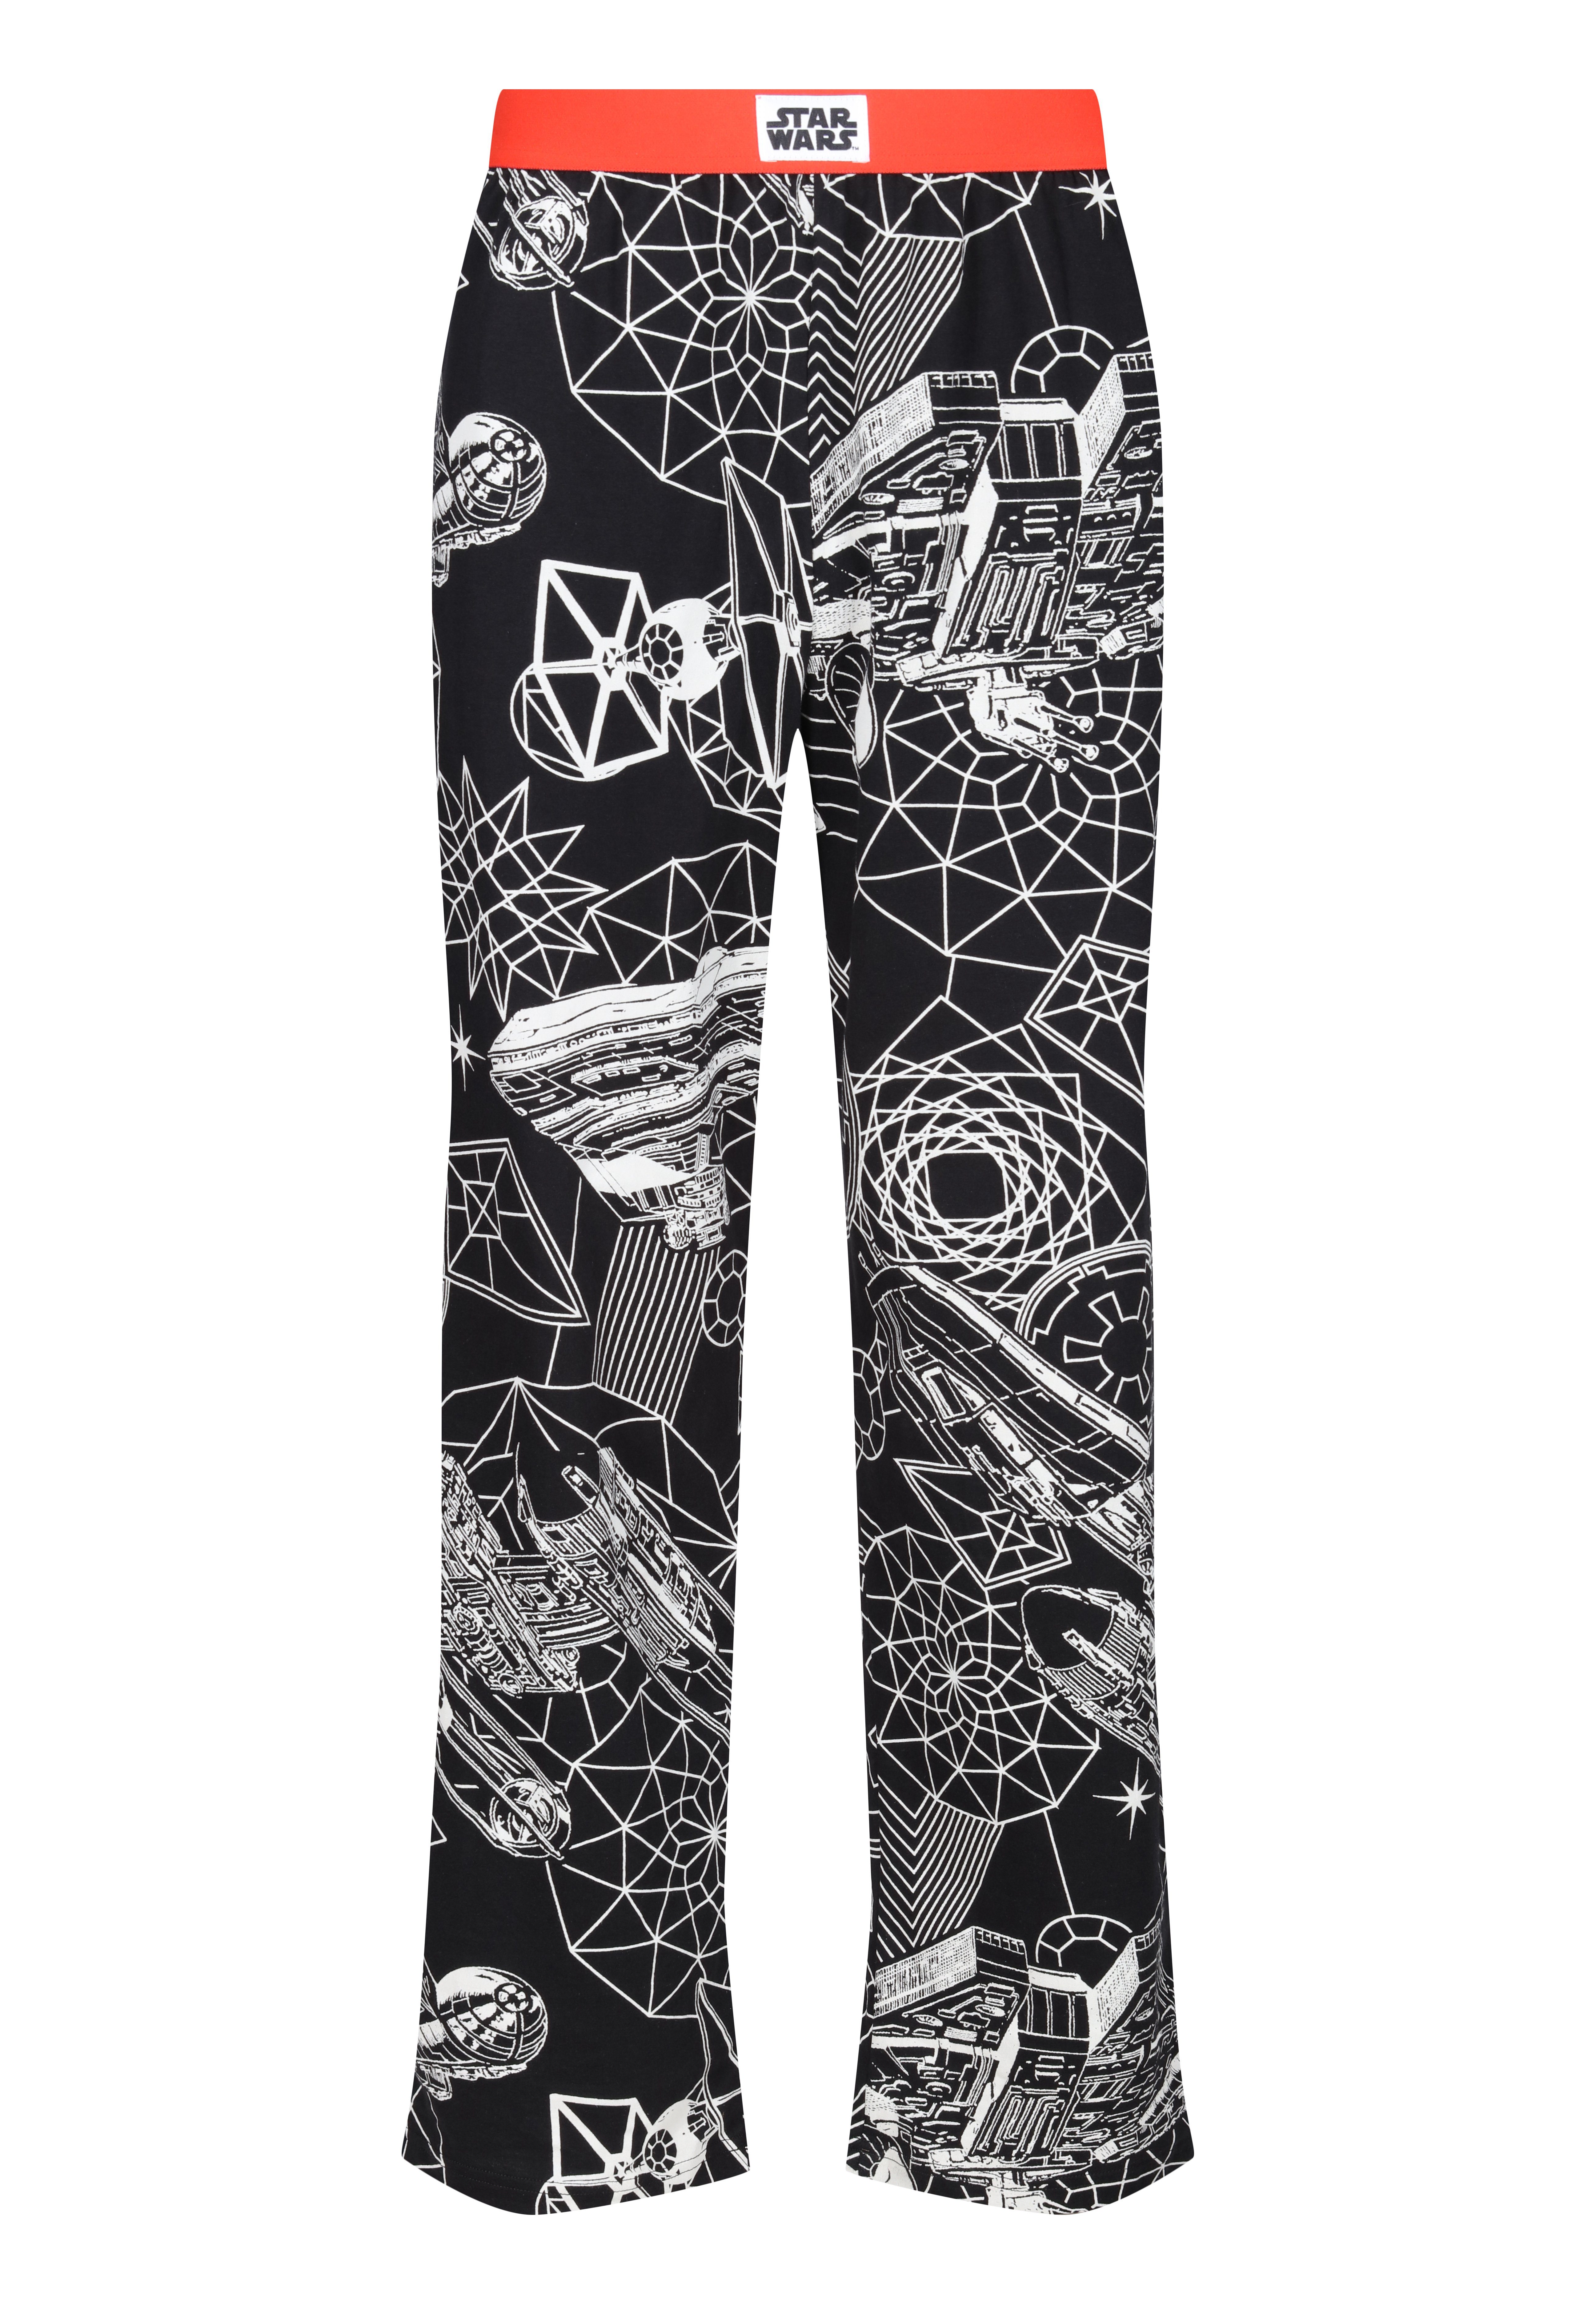 Recovered Loungepants Loungepant - Black Wars Ships Star